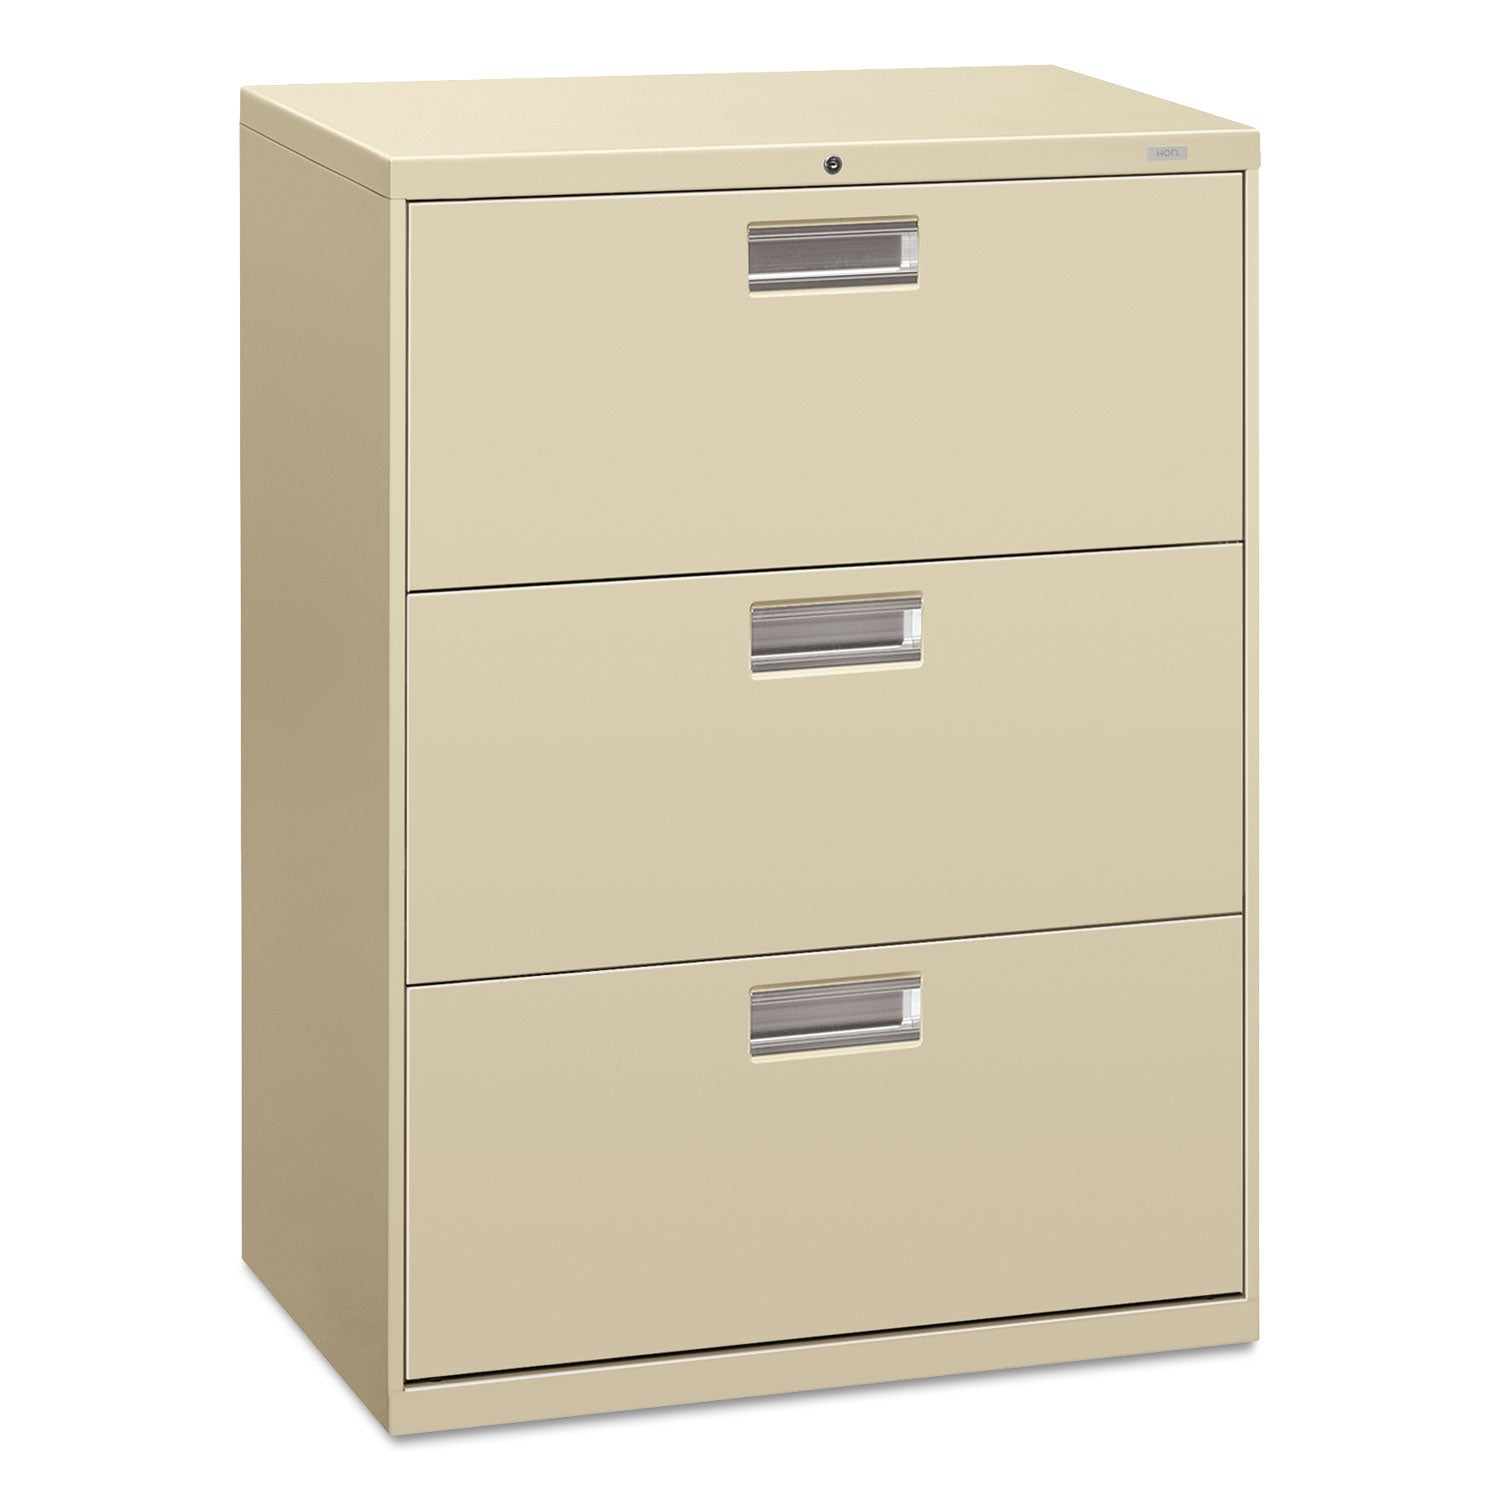 Brigade 600 Series Lateral File, 3 Legal/Letter-Size File Drawers, Putty, 30" x 18" x 39.13 - 